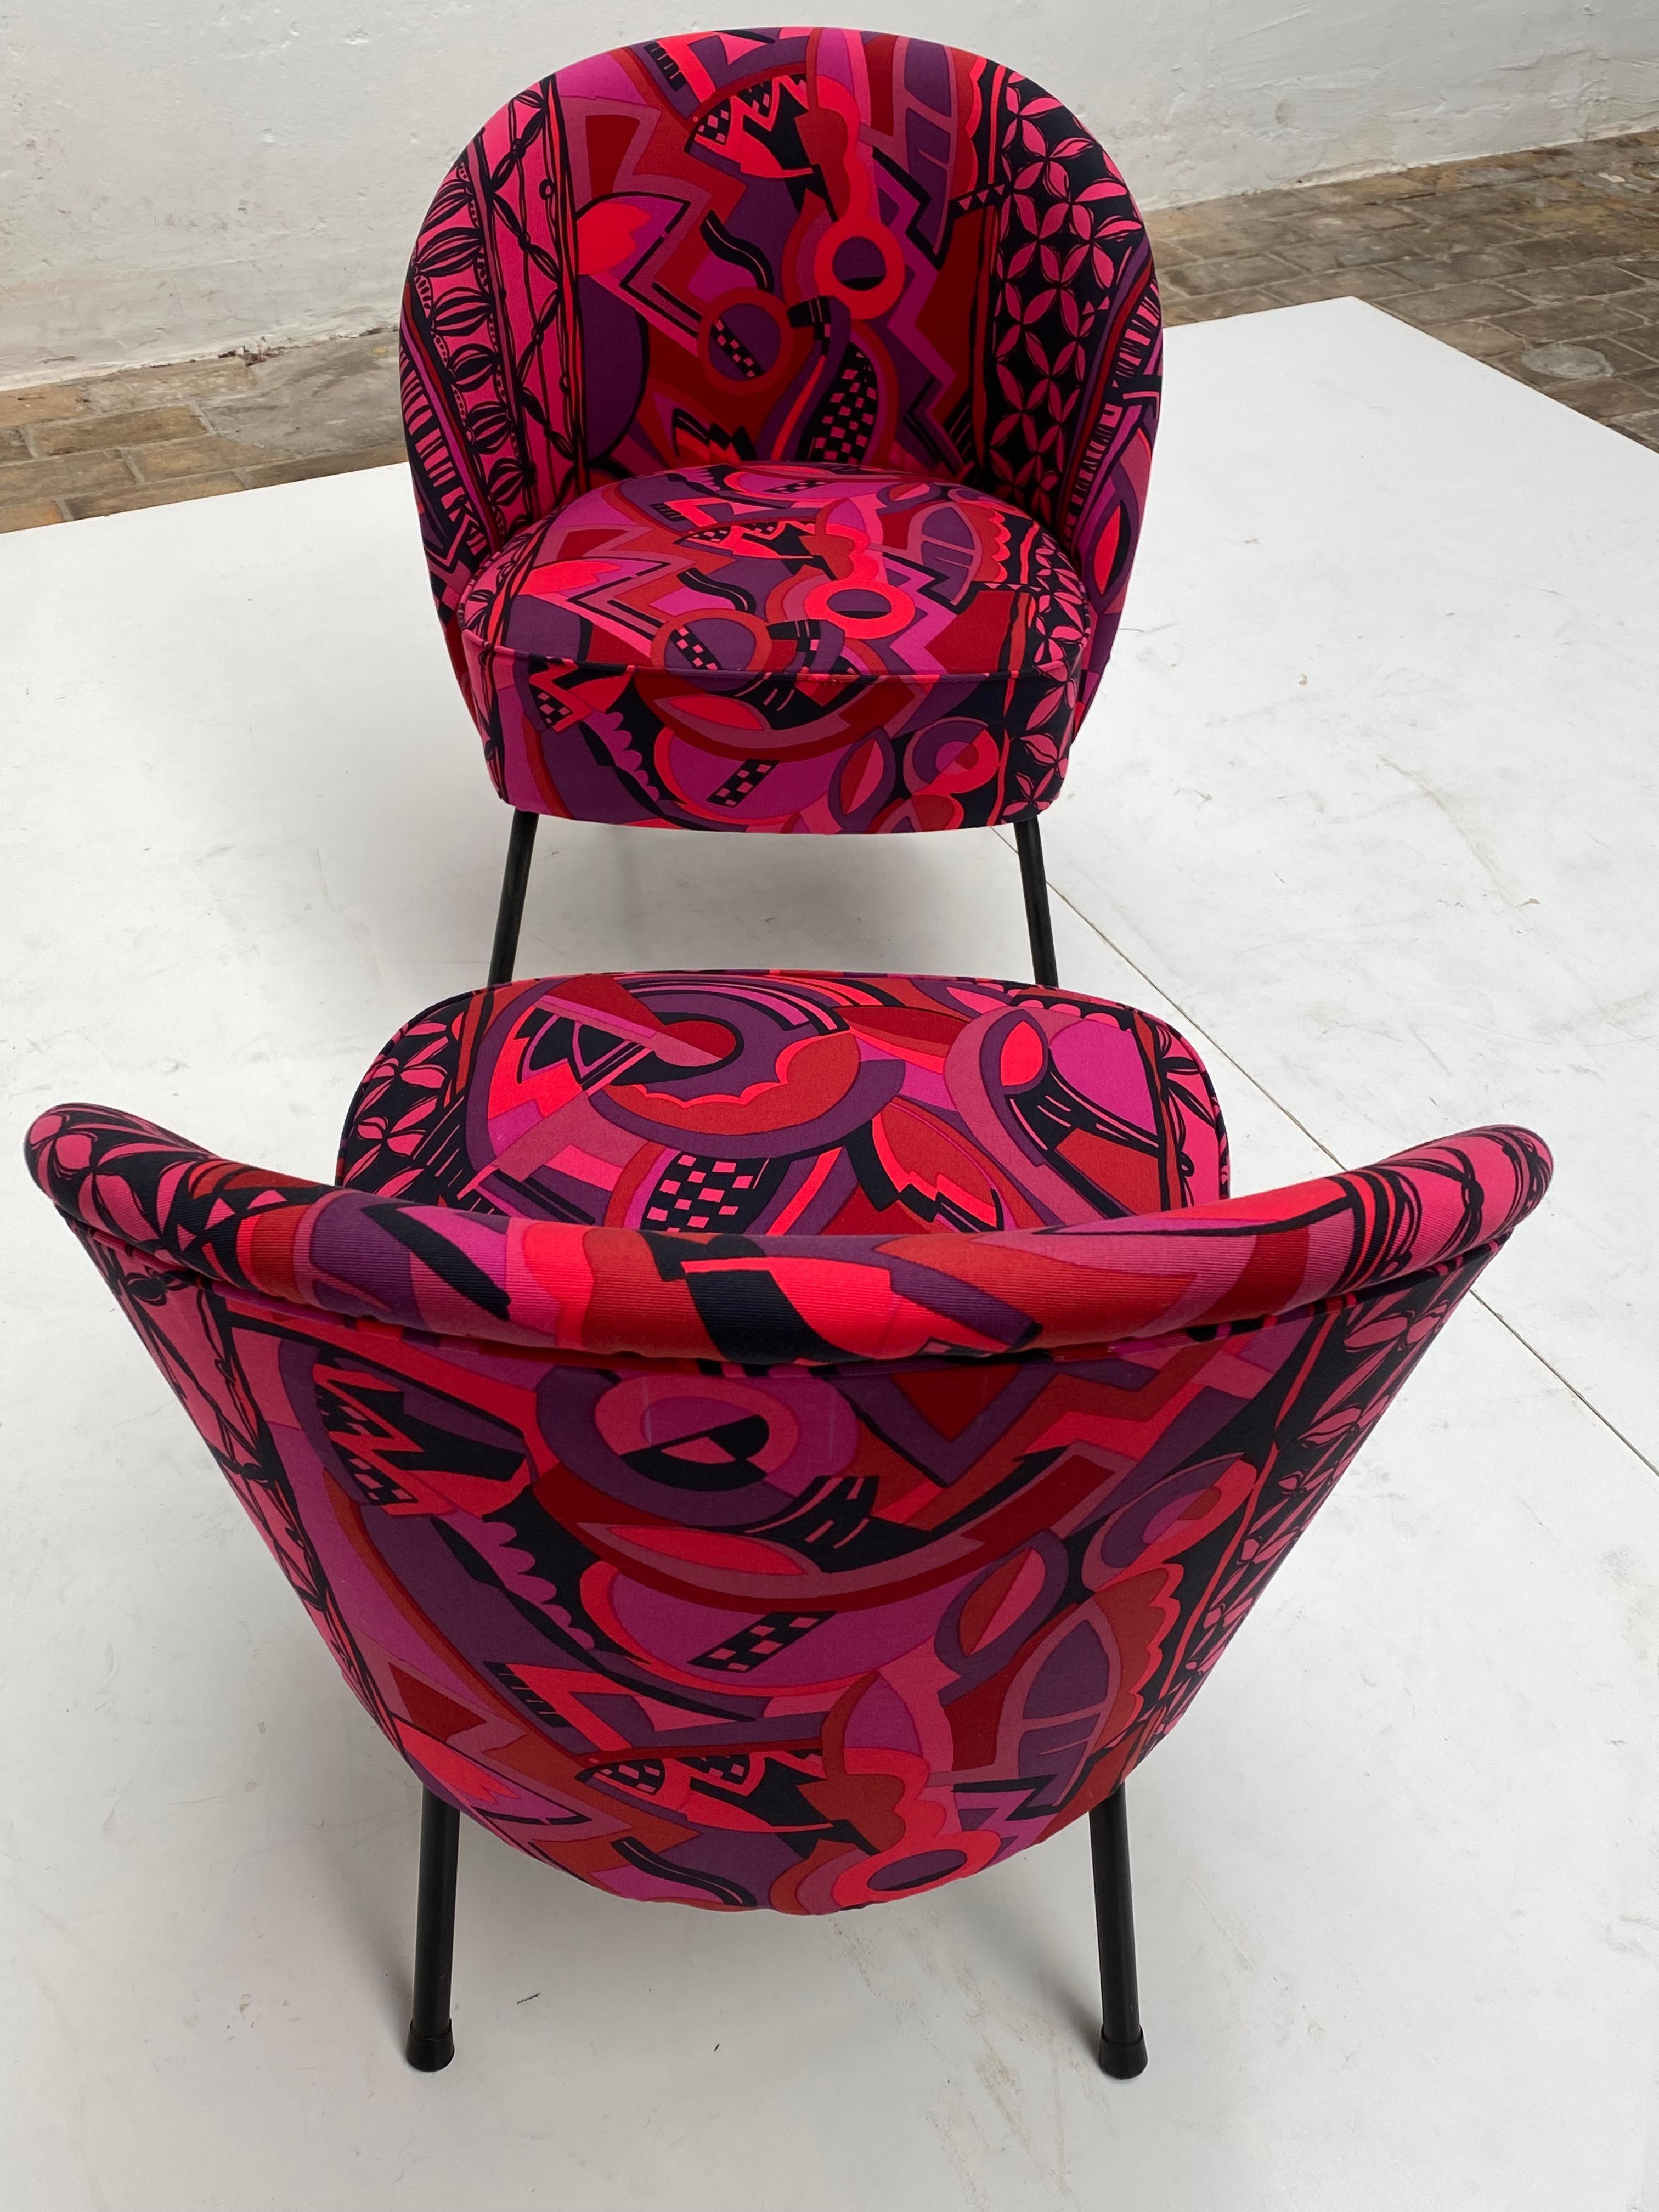 Mid-20th Century Bespoke Gianni Versace Fabric Custom Upholstered Pair of 1950's Cocktail Chairs For Sale